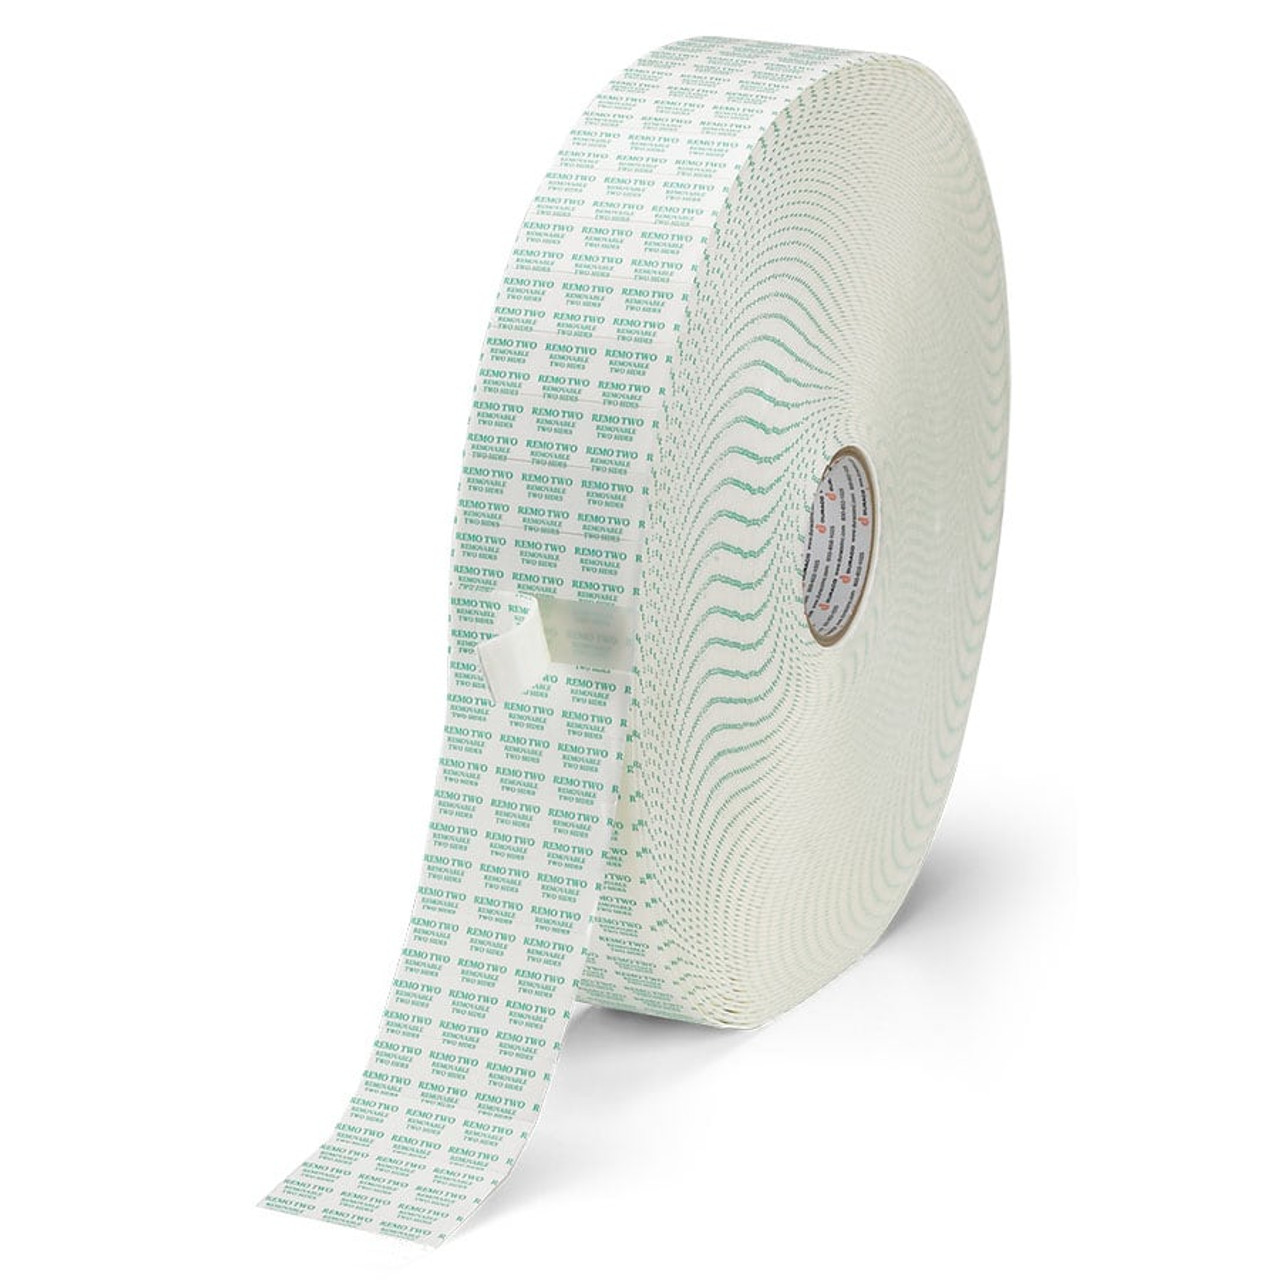 2-Rolls REMO-TWO 1” Wide 108 FT Long 1/8” Thick Double Sided Removable Foam  Tape